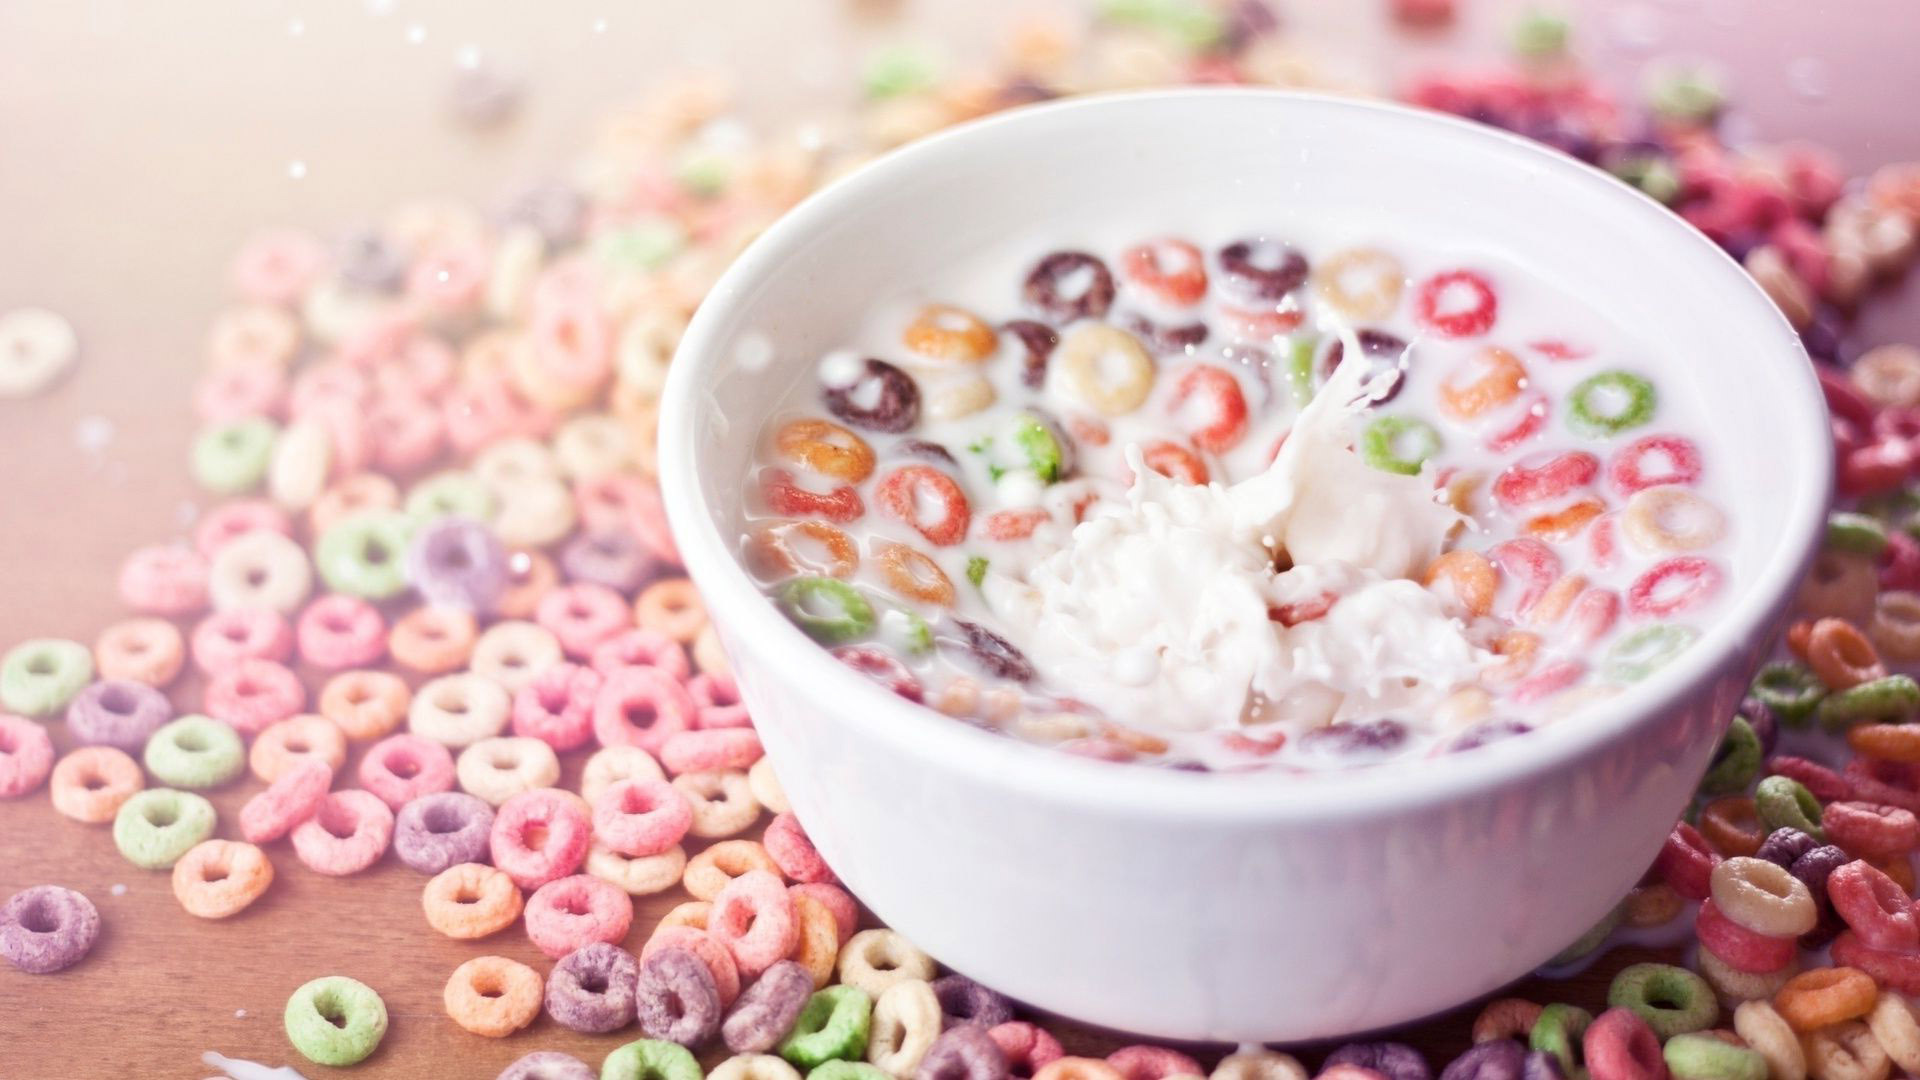 Awesome Cereal Bowl Wallpaper